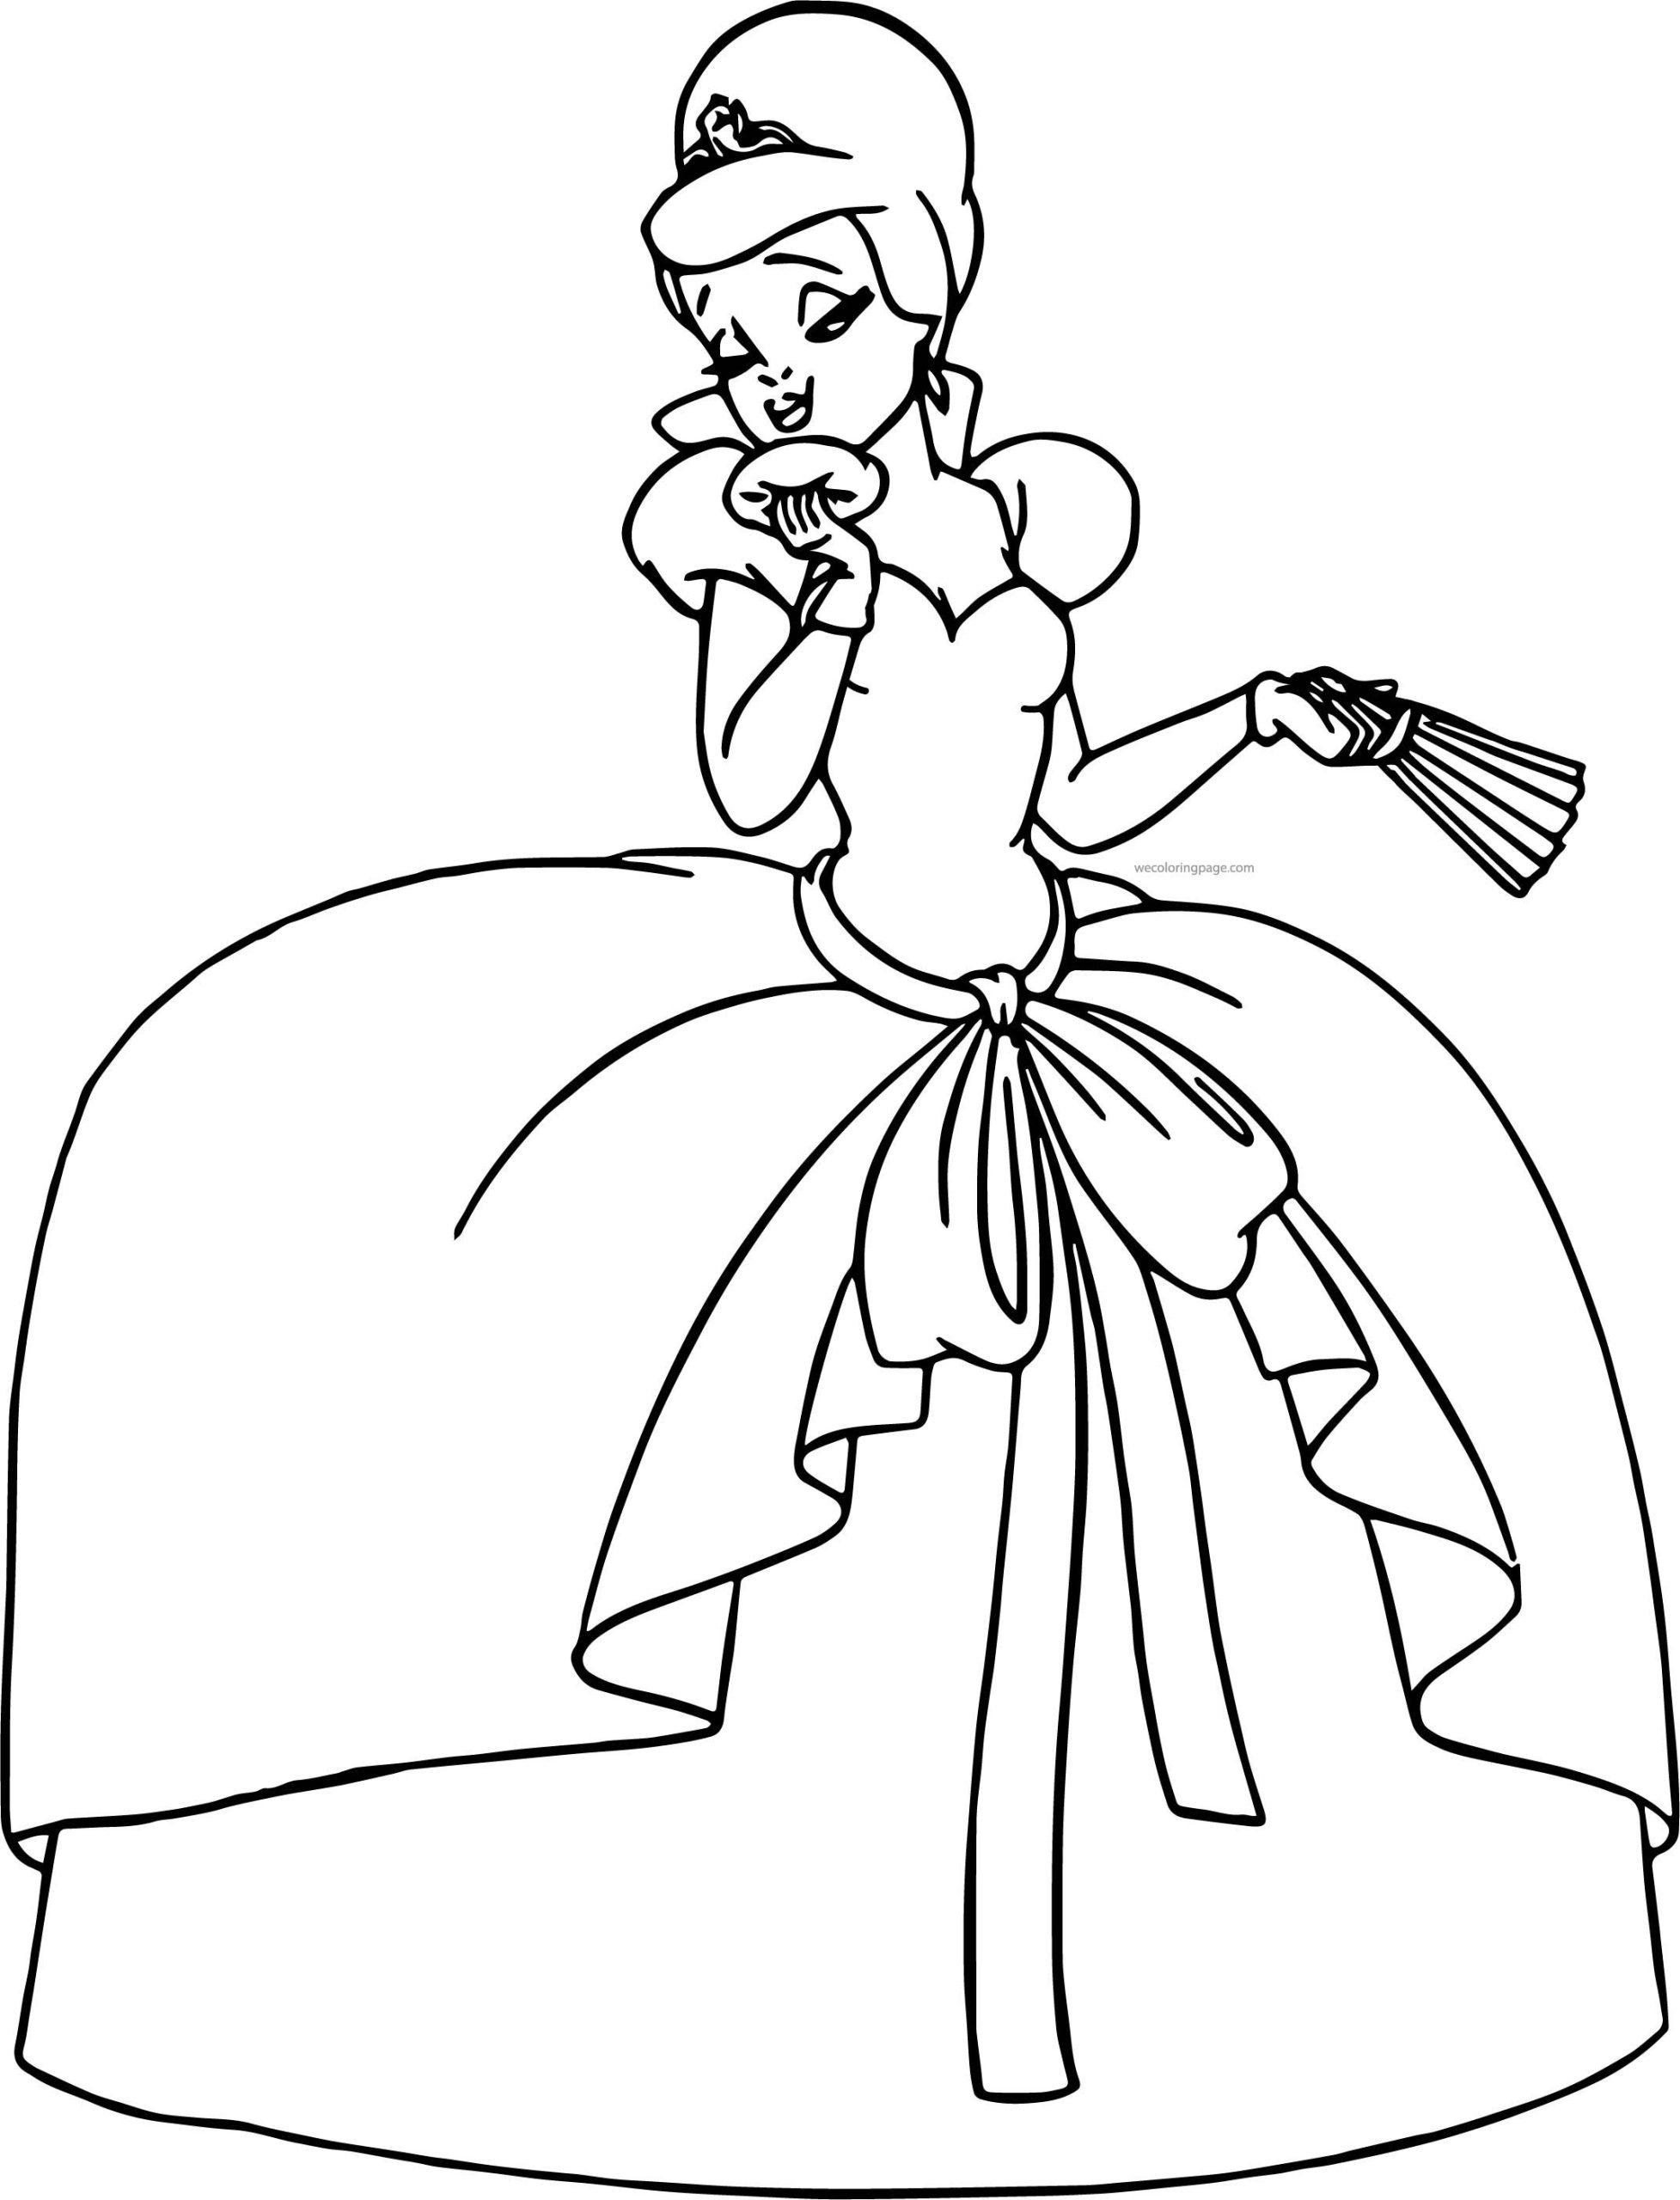 Charlotte Princess And The Frog Coloring Pages